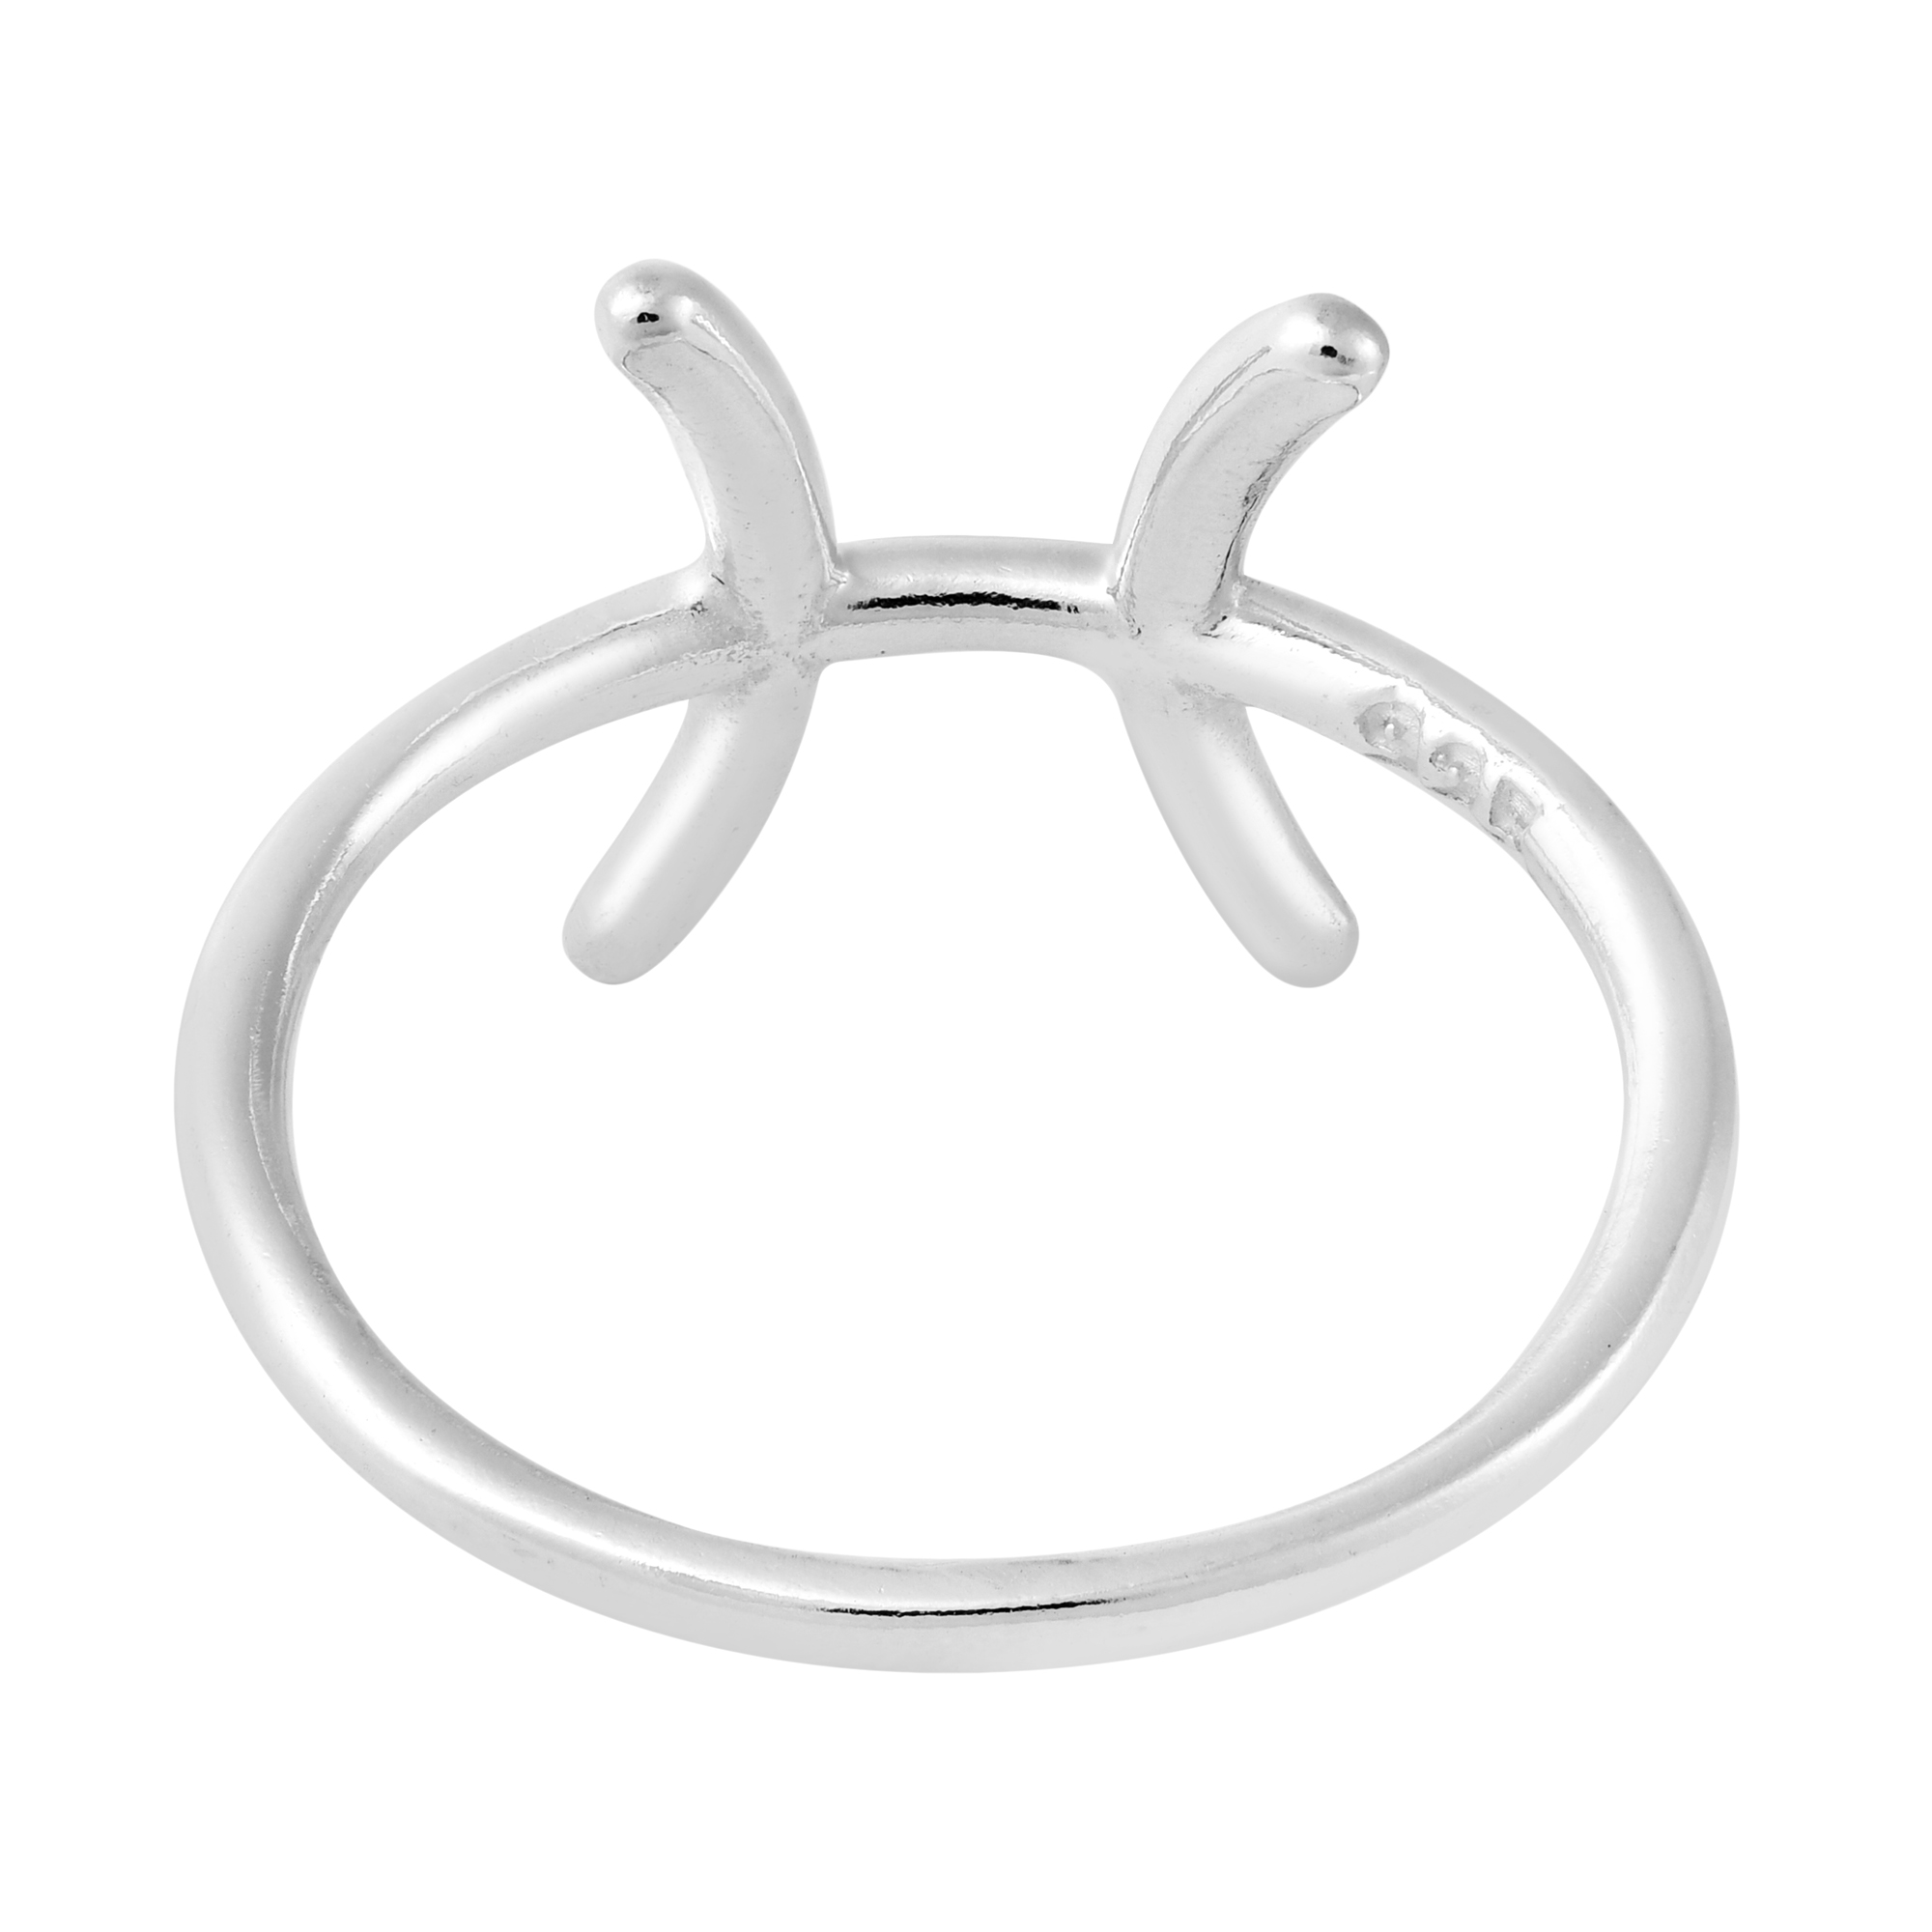 Astrology Horoscope Zodiac 'Pisces' Constellation .925 Sterling Silver Ring - 8 - image 2 of 5